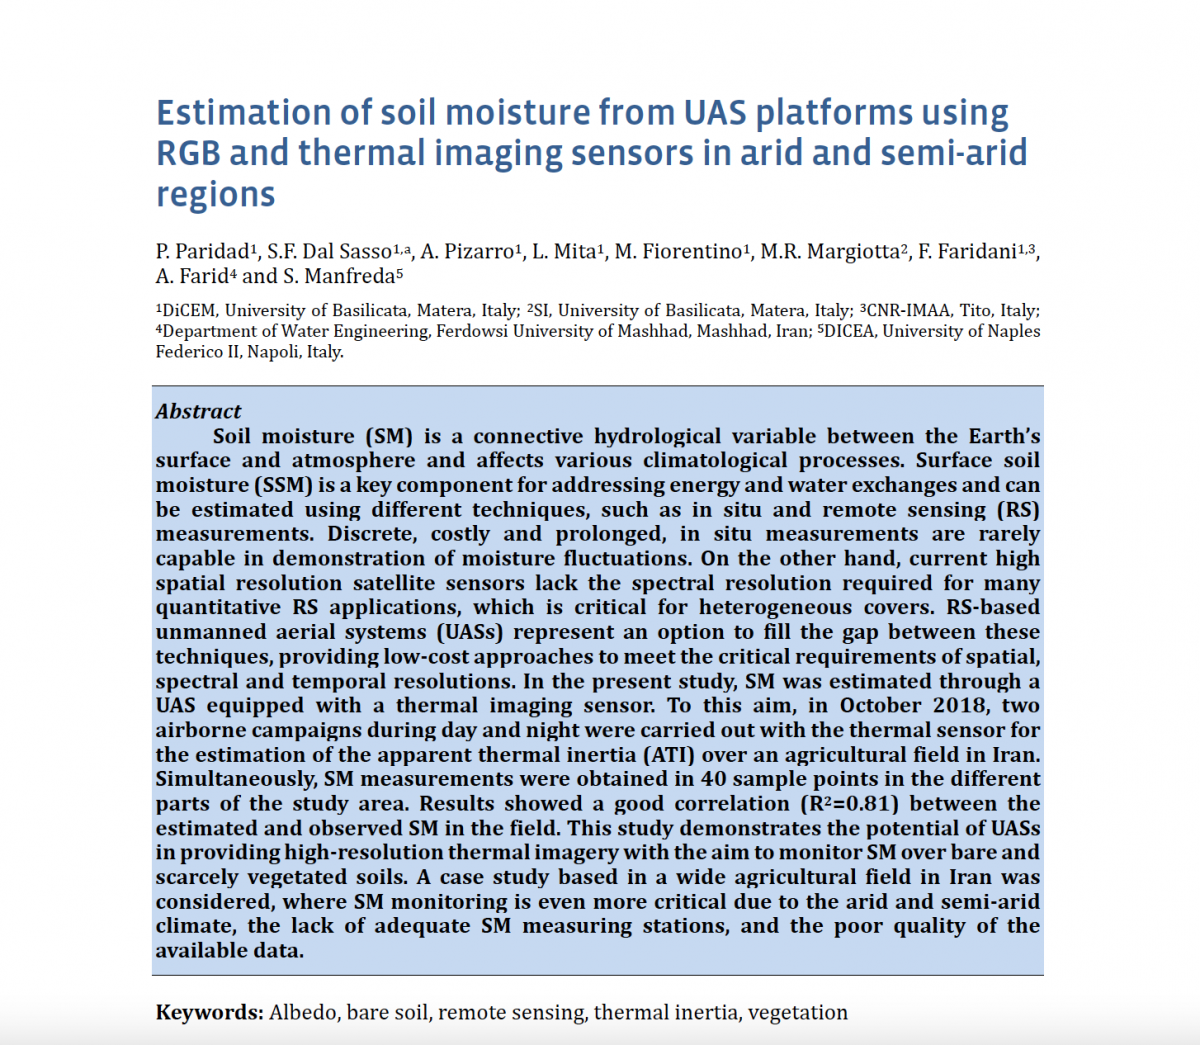 Estimation of soil moisture from UAS platforms using RGB and thermal imaging sensors in arid and semi-arid regions